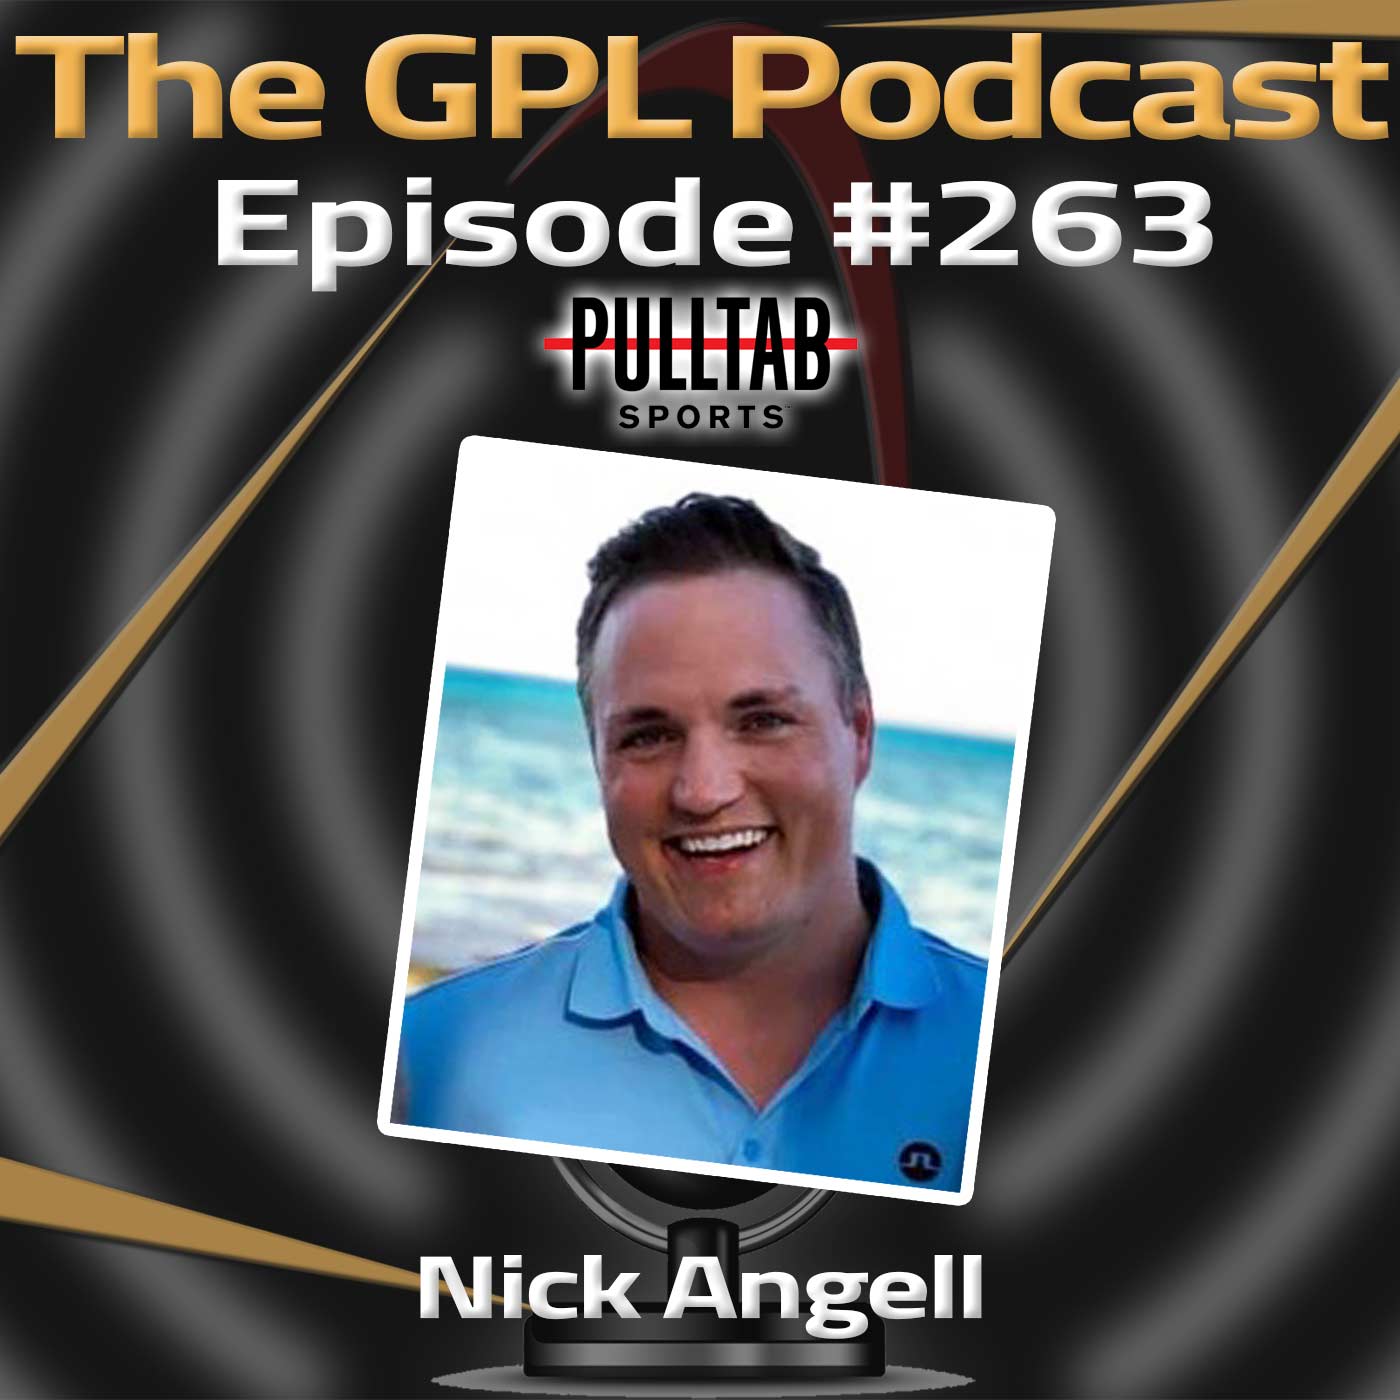 GPL Podcast #263: Great stories with Nick Angell